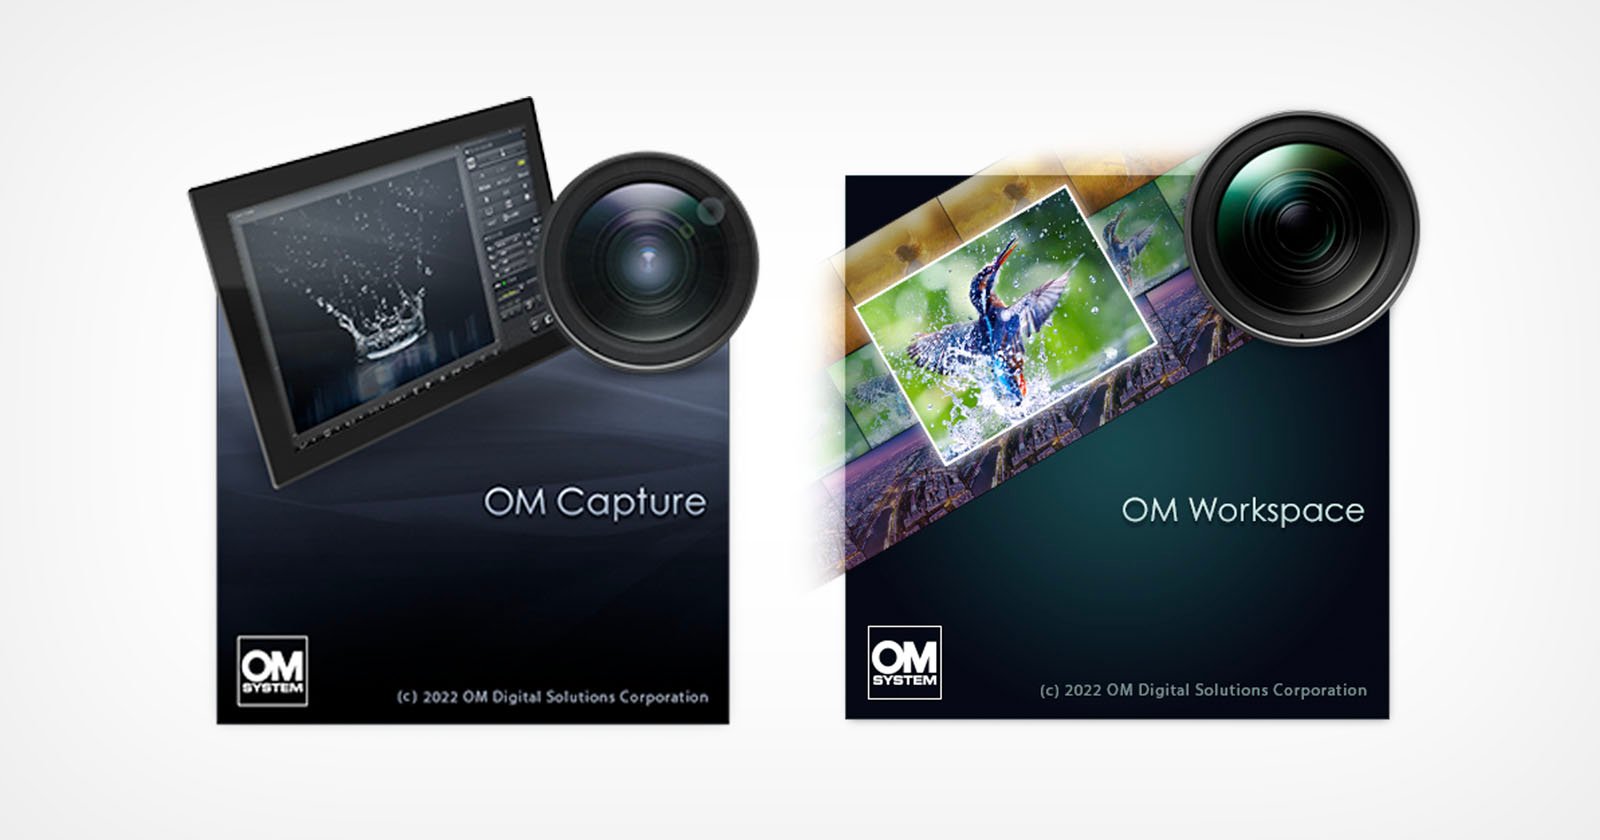 Two promotional graphics for om system software: om capture and om workspace, each featuring a camera lens and vibrant digital images on computer screens, signifying photography and editing software.